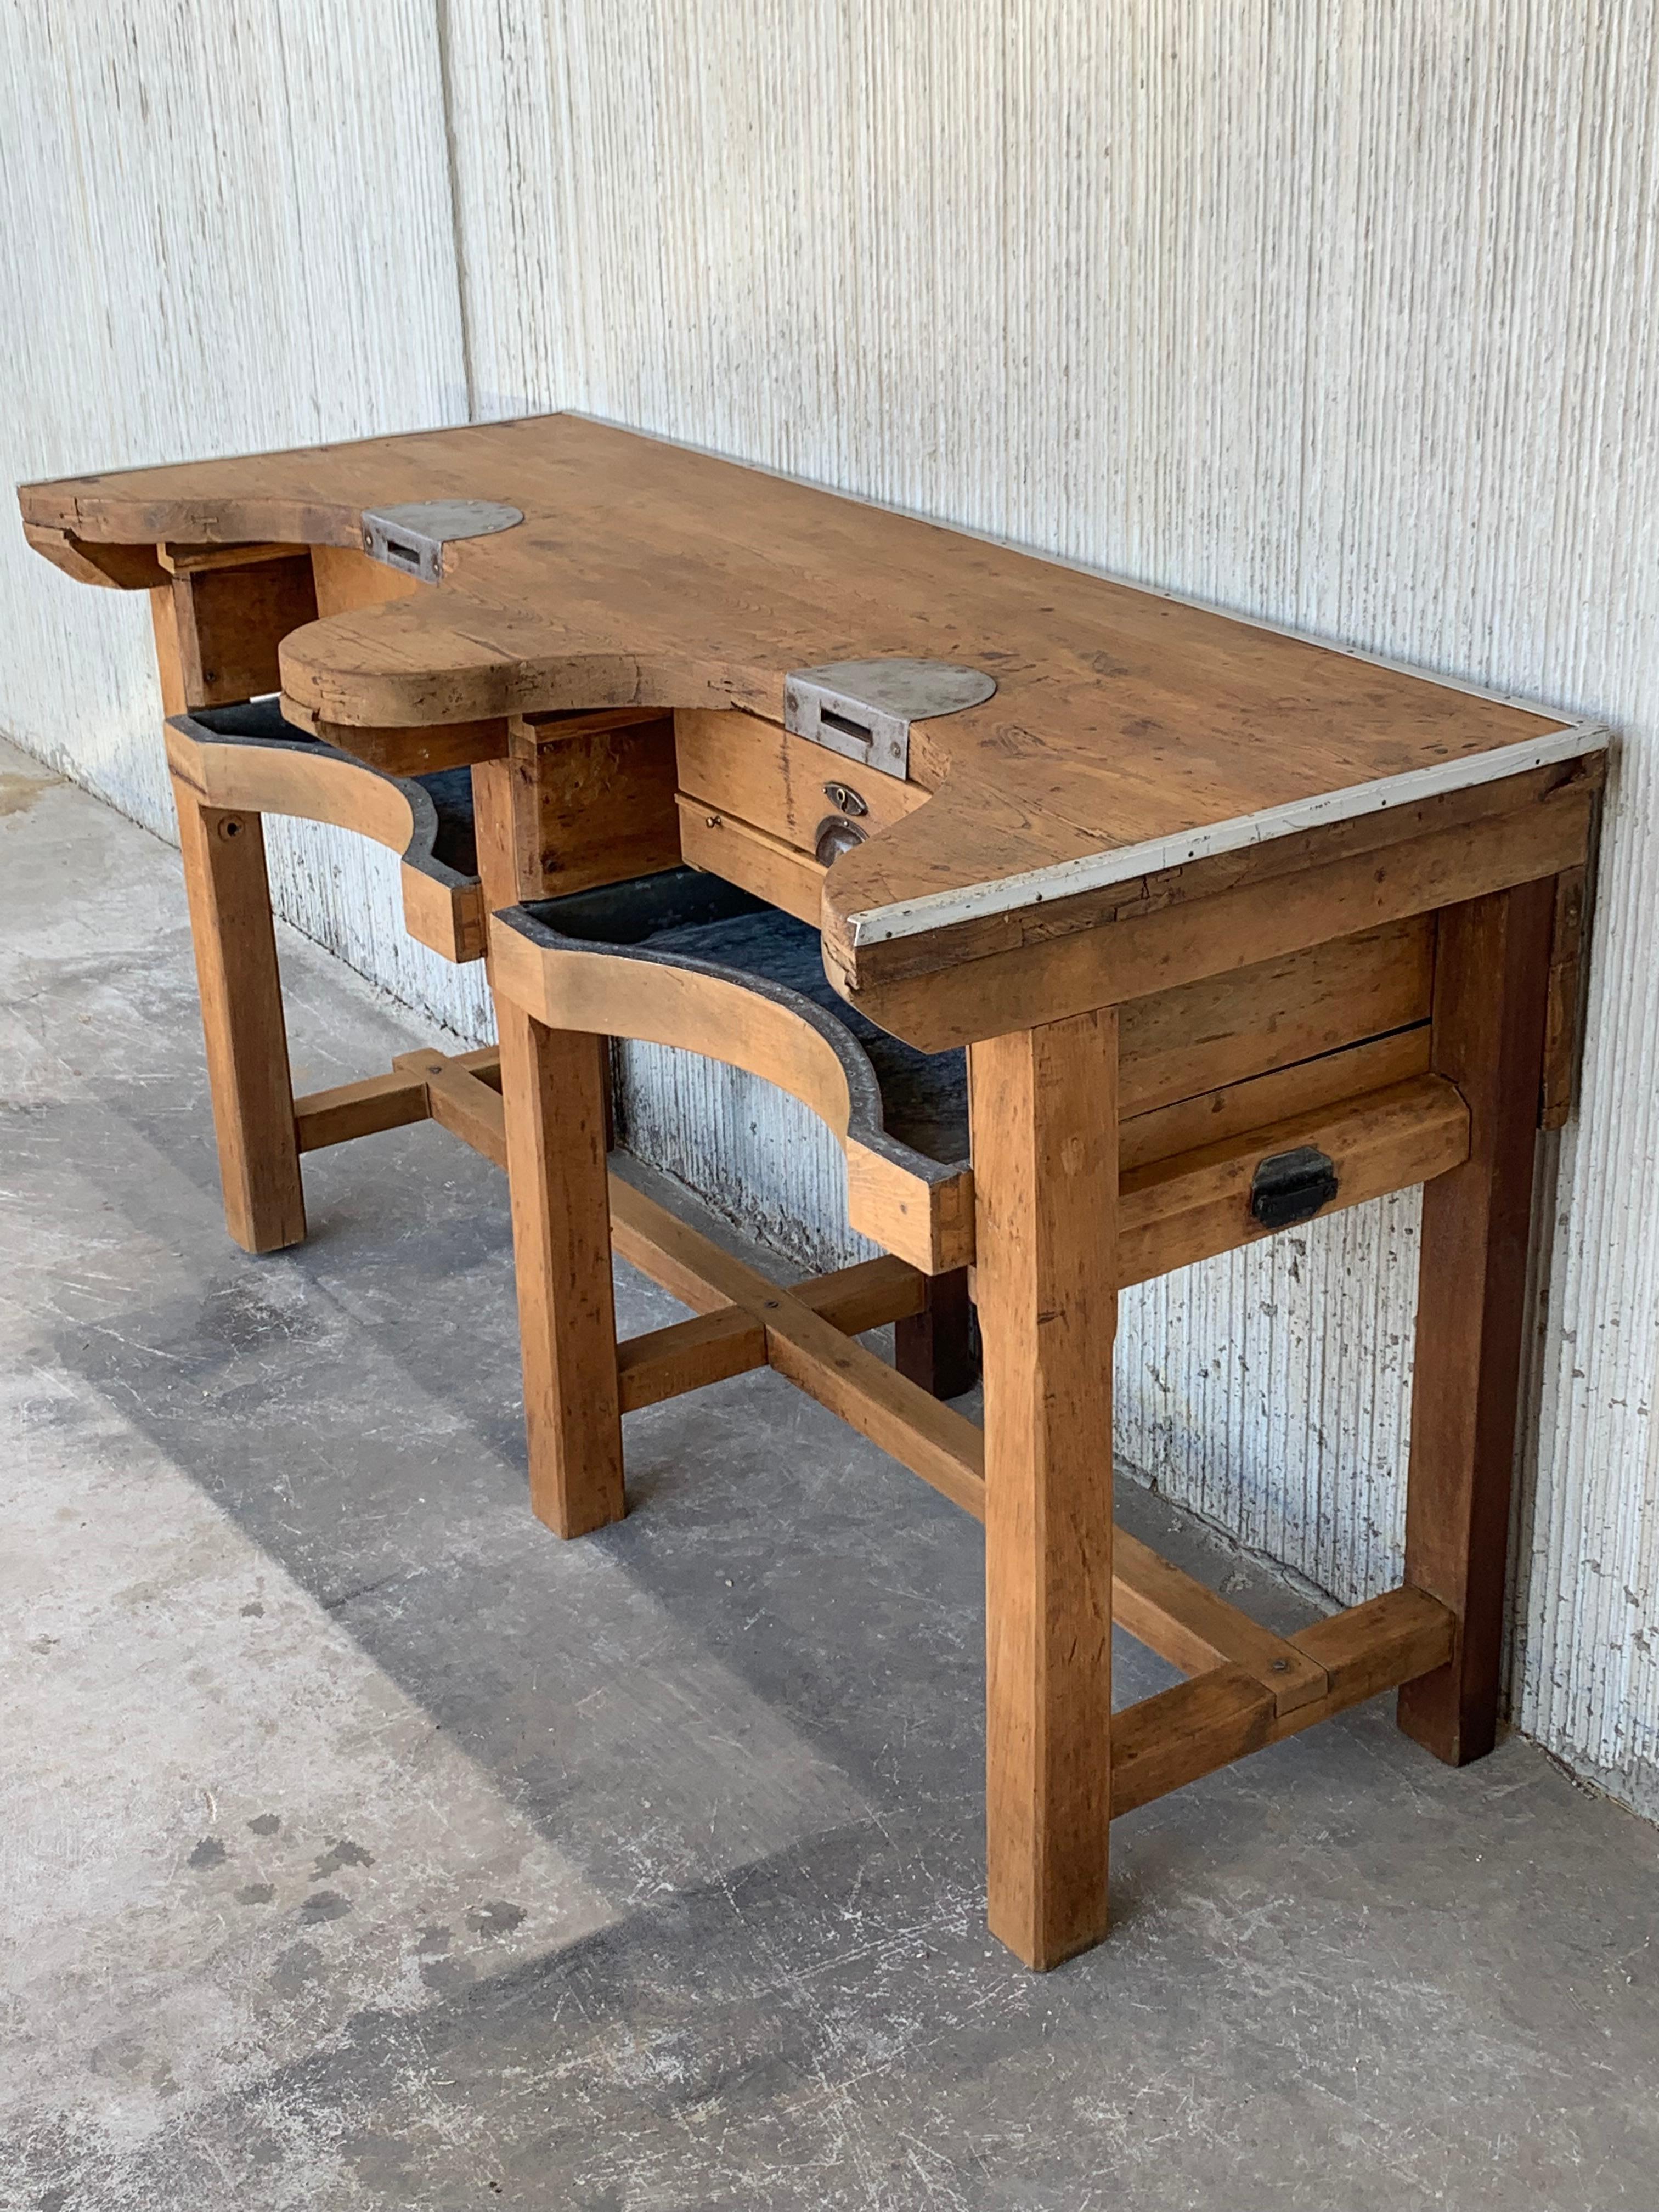 Mid-Century Modern French Jewery Bench or Work Bench Table with Zinc-Lined Drawers and Compartment